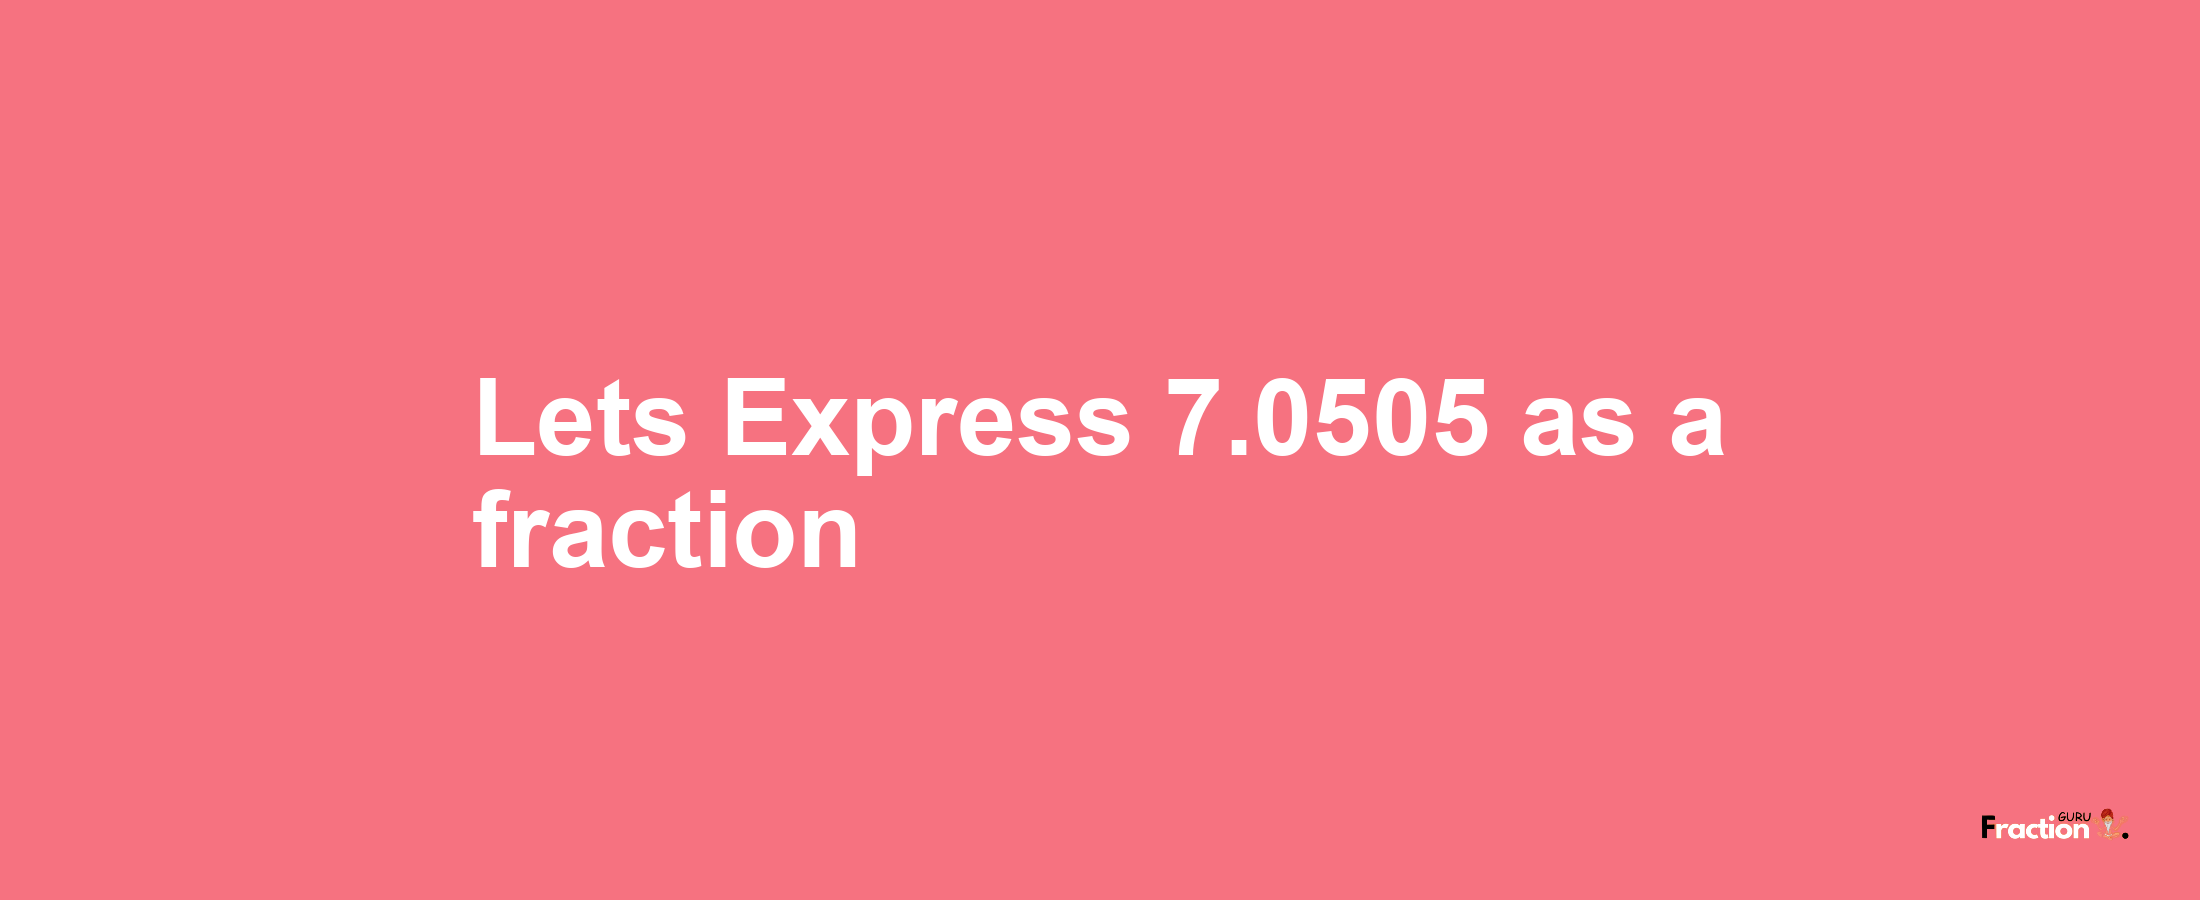 Lets Express 7.0505 as afraction